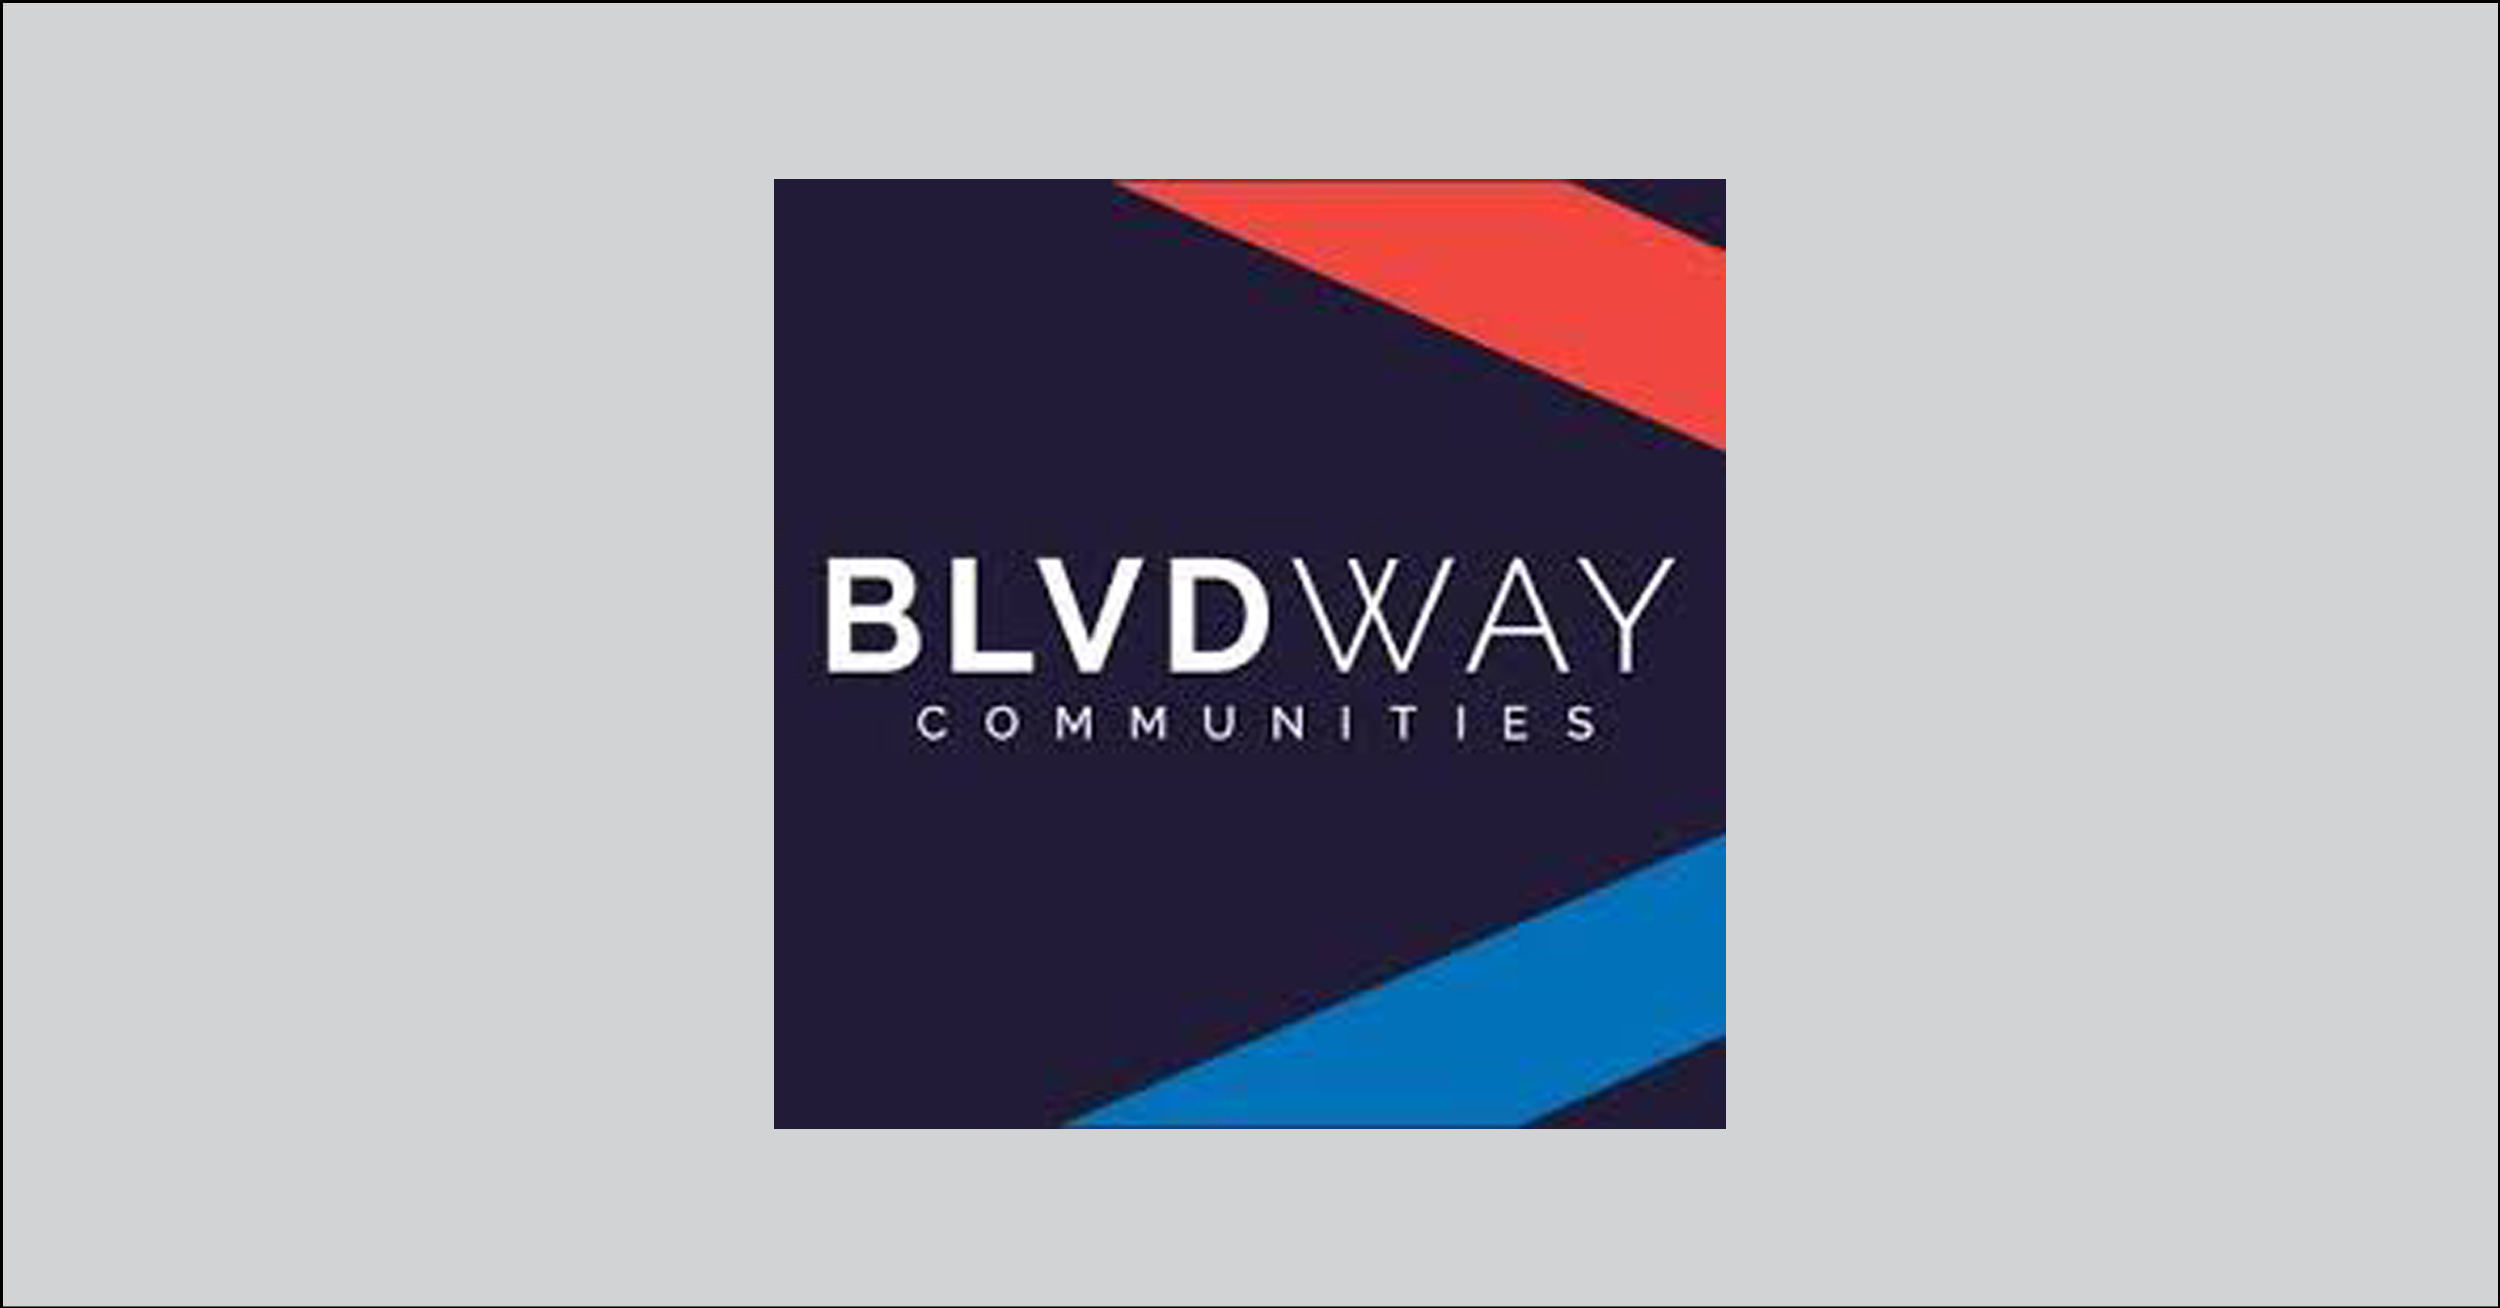 Find new construction or search for new homes and communities by BLVD Way Communities in Colorado